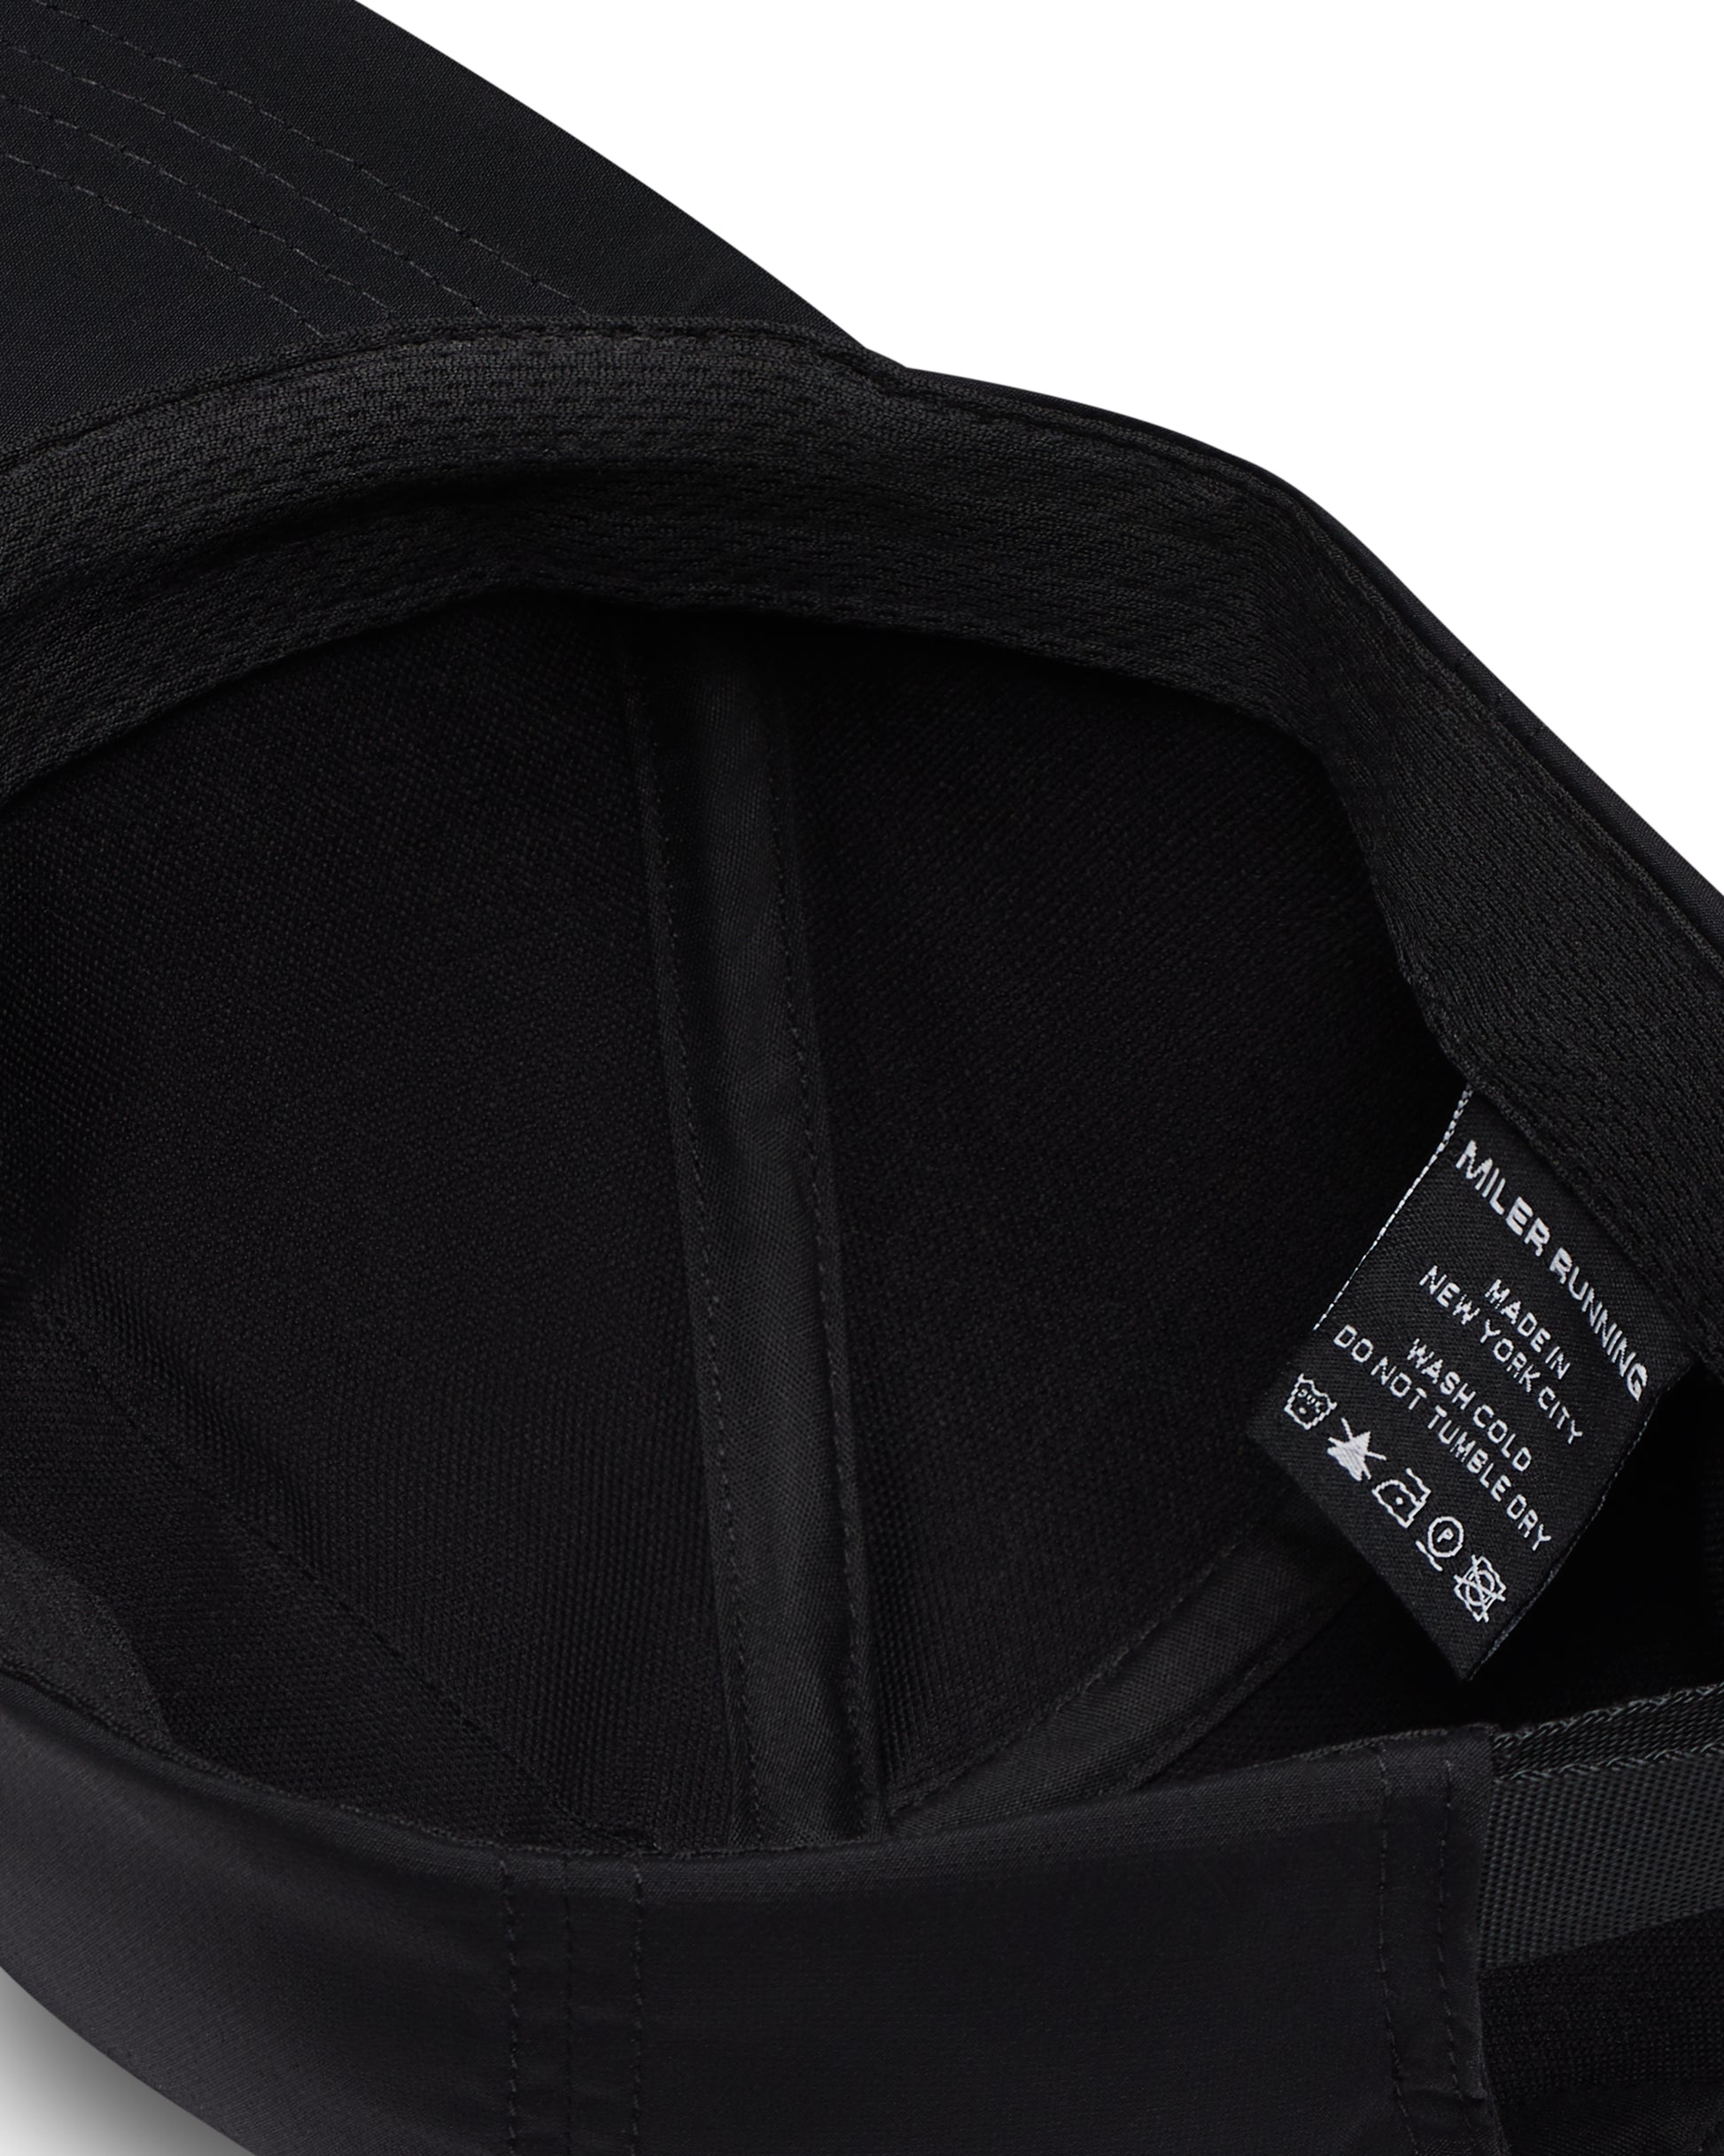 Muir Breathable Running Hat | Path Projects Black / Os